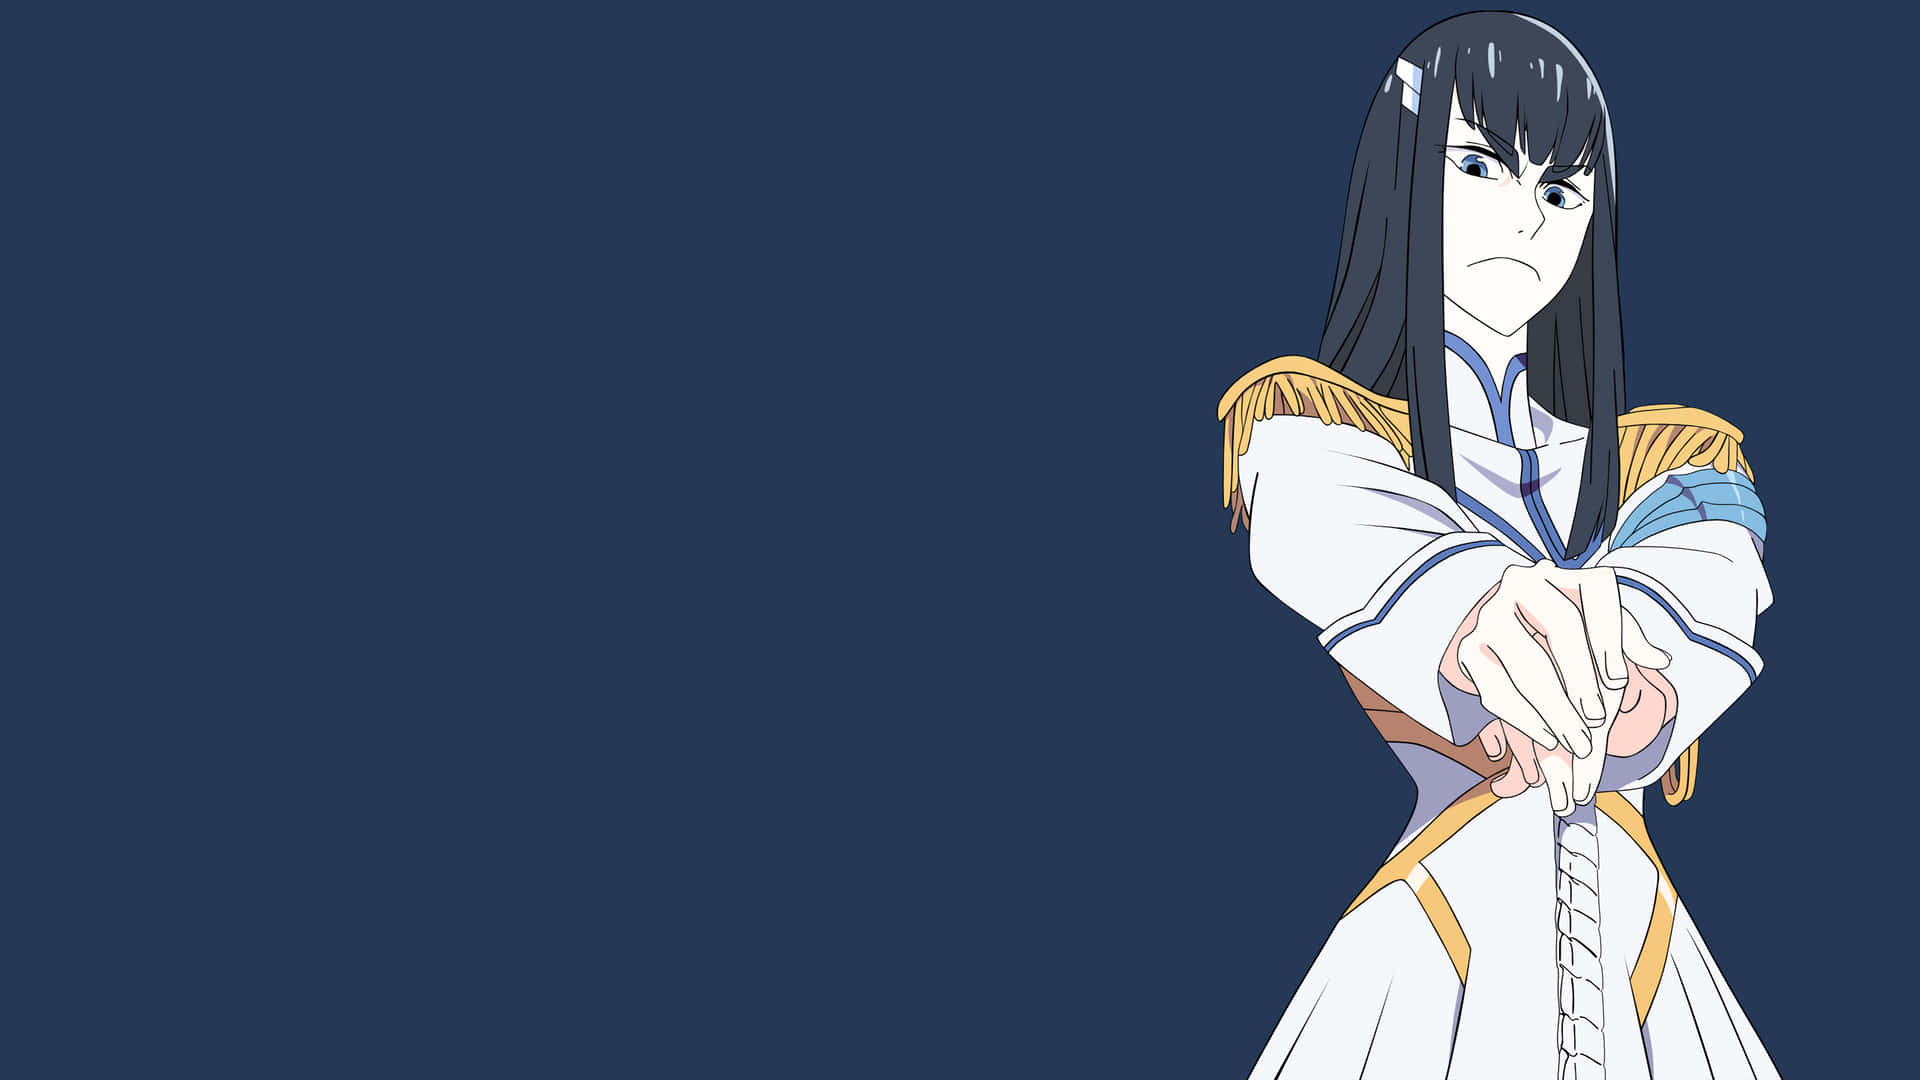 Satsuki Kiryuin, the young, strong-willed, and heroic woman from popular anime series Kill la Kill Wallpaper